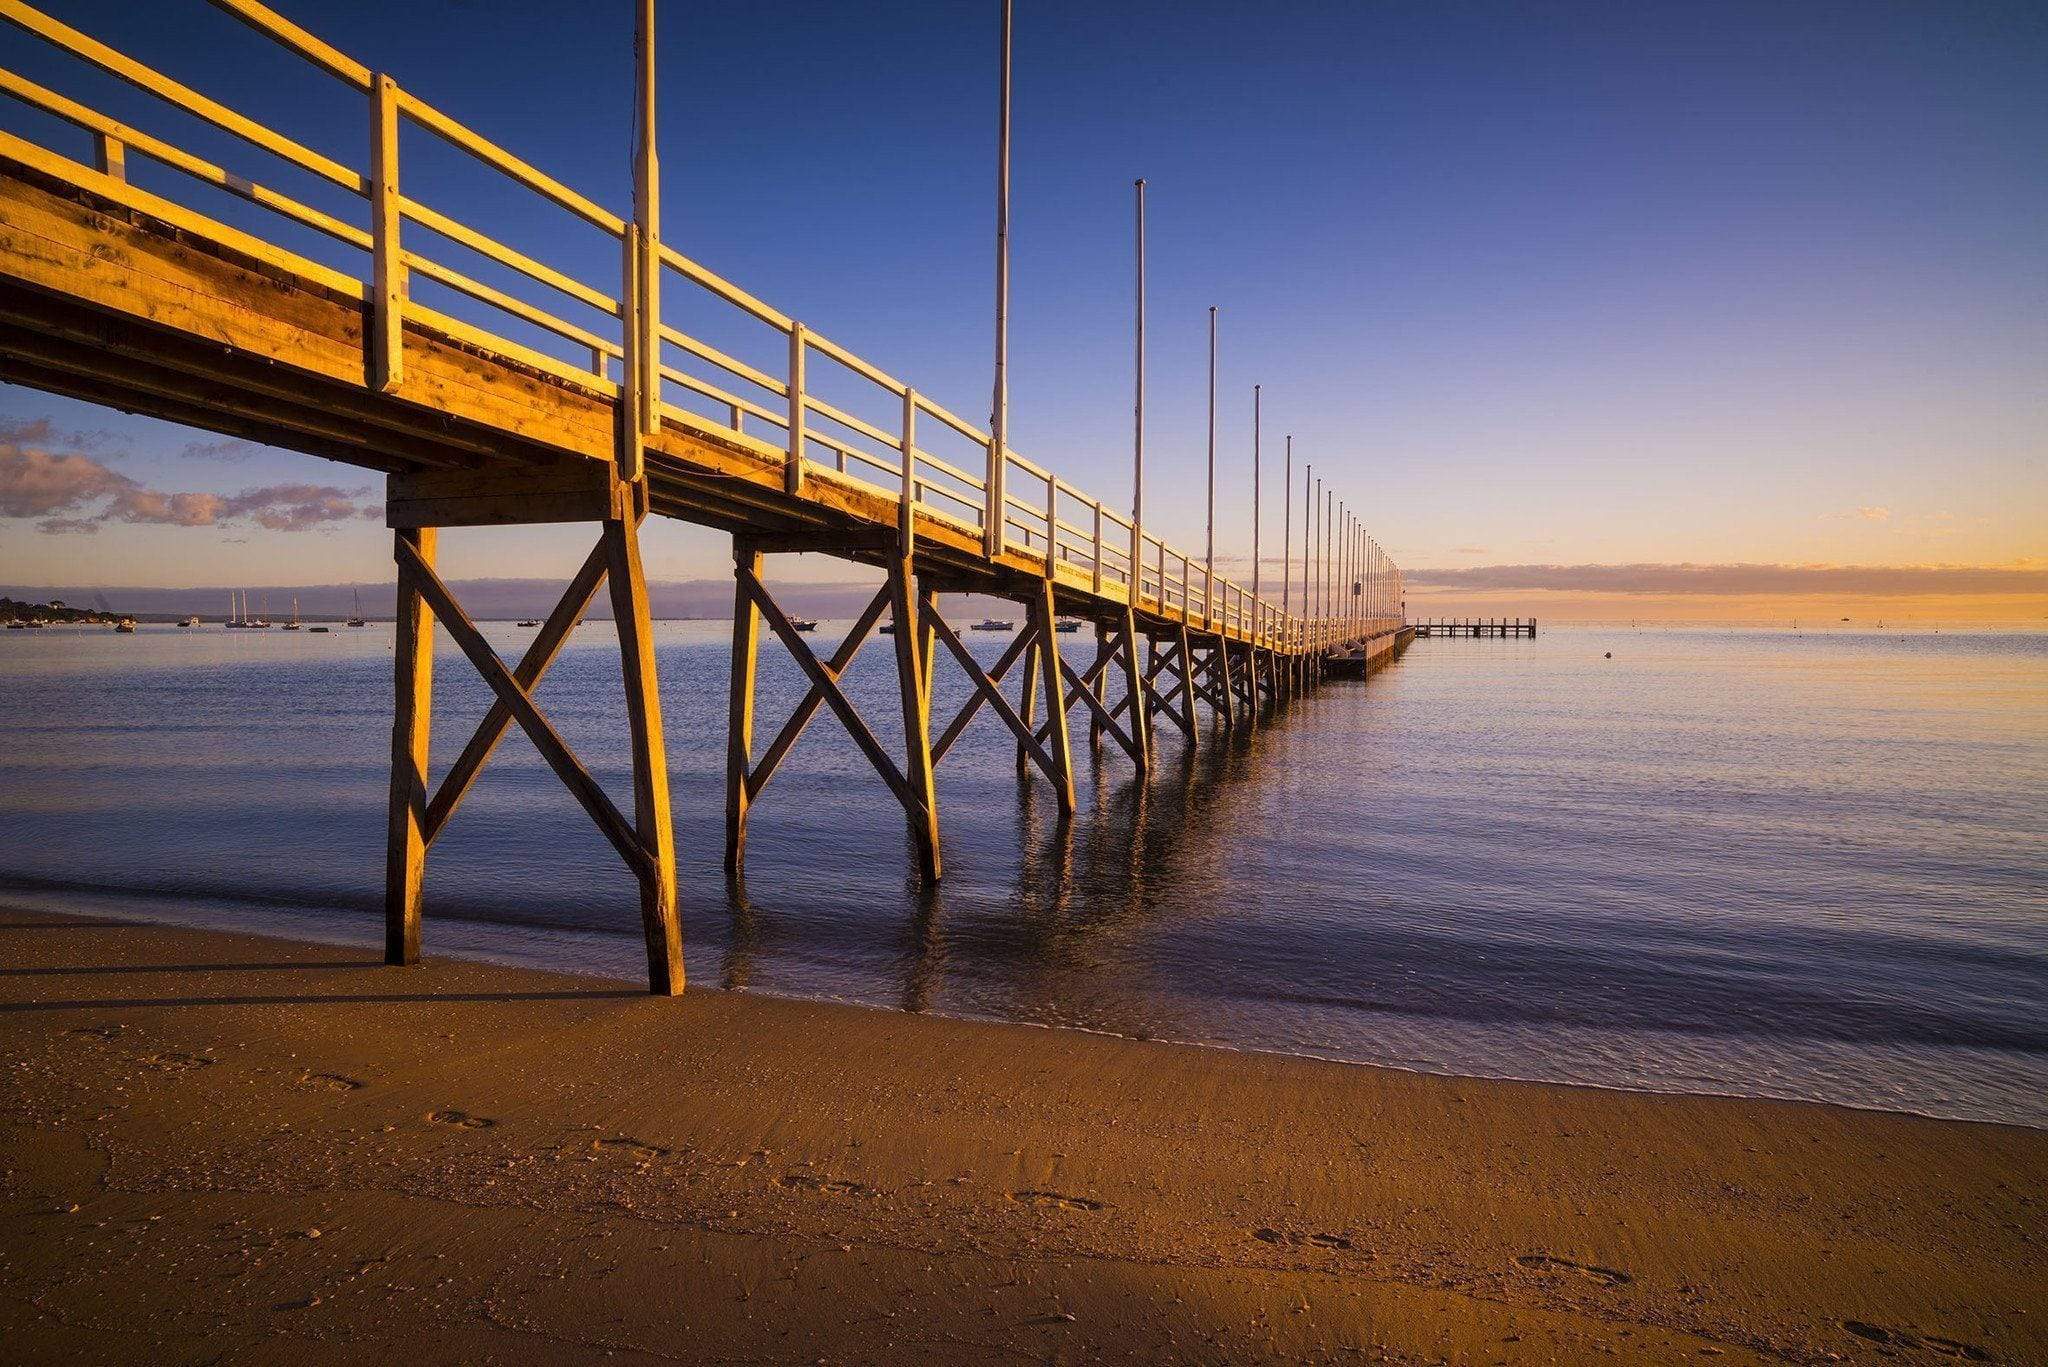 A long bridge over the lake with the pillar underwater, Sorrento Couta Boat Club Jetty sunrise